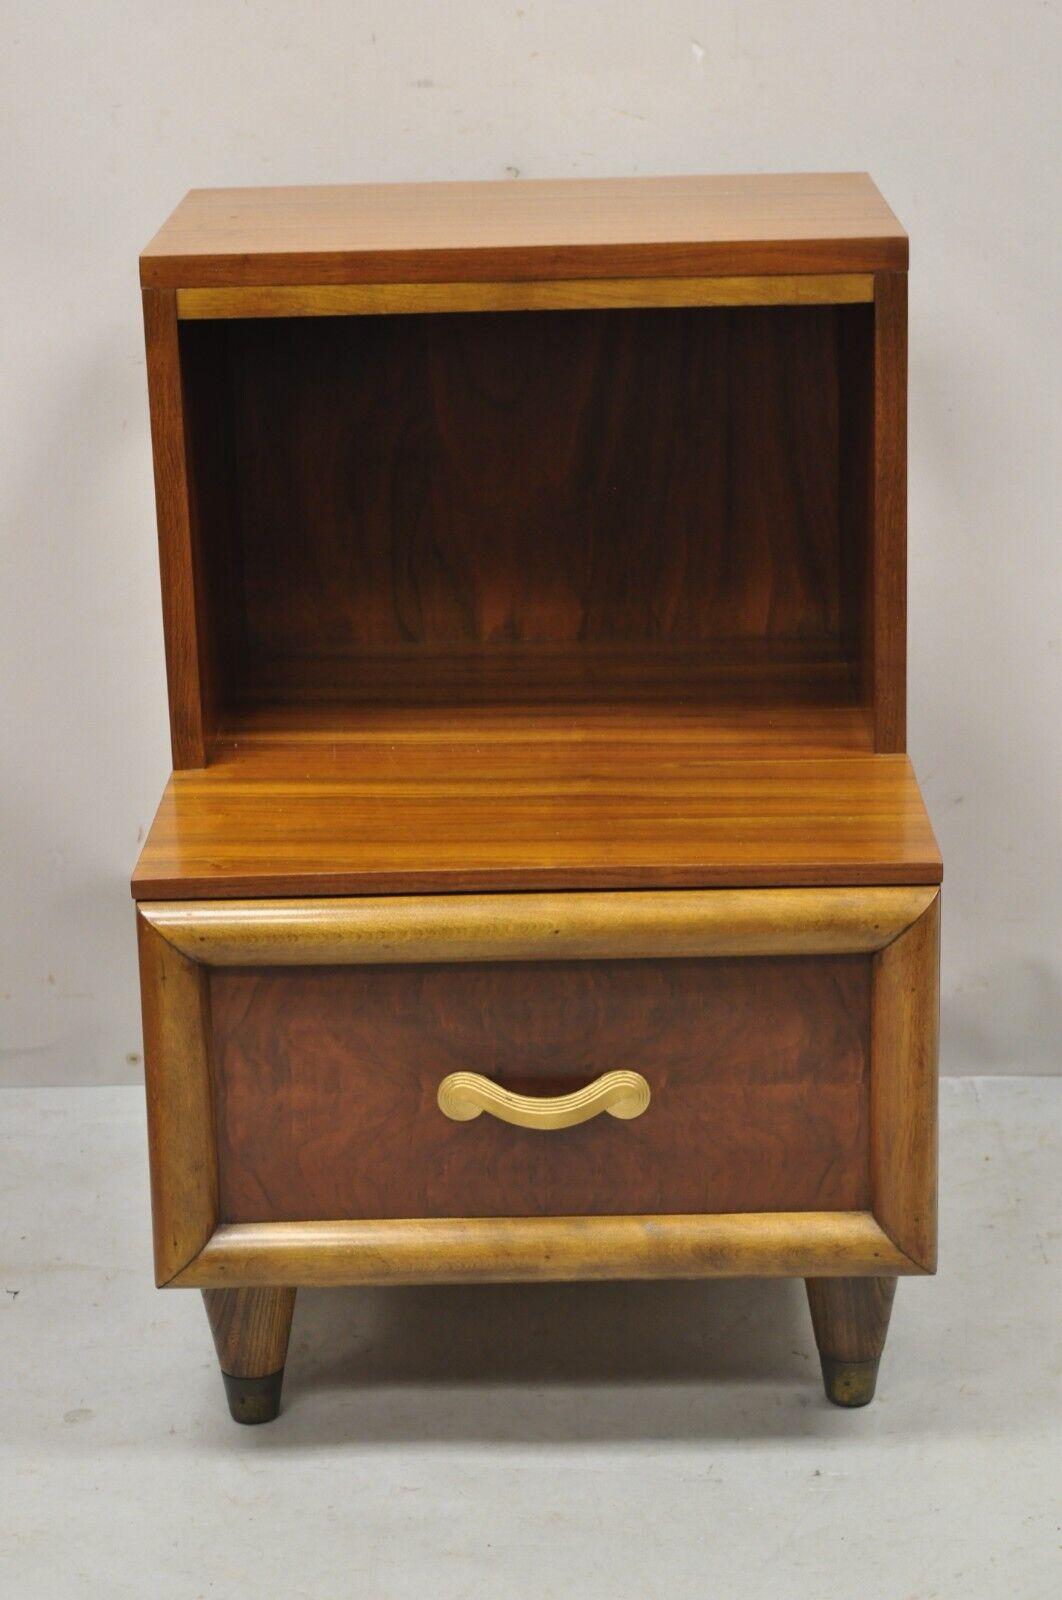 Joerns Bros Mid Century Art Deco Walnut Step Up Nightstand Side Table. Item features beautiful wood grain, original label, 1 dovetailed drawer, tapered legs, quality American craftsmanship, great style and form. Circa early to mid 20th century.